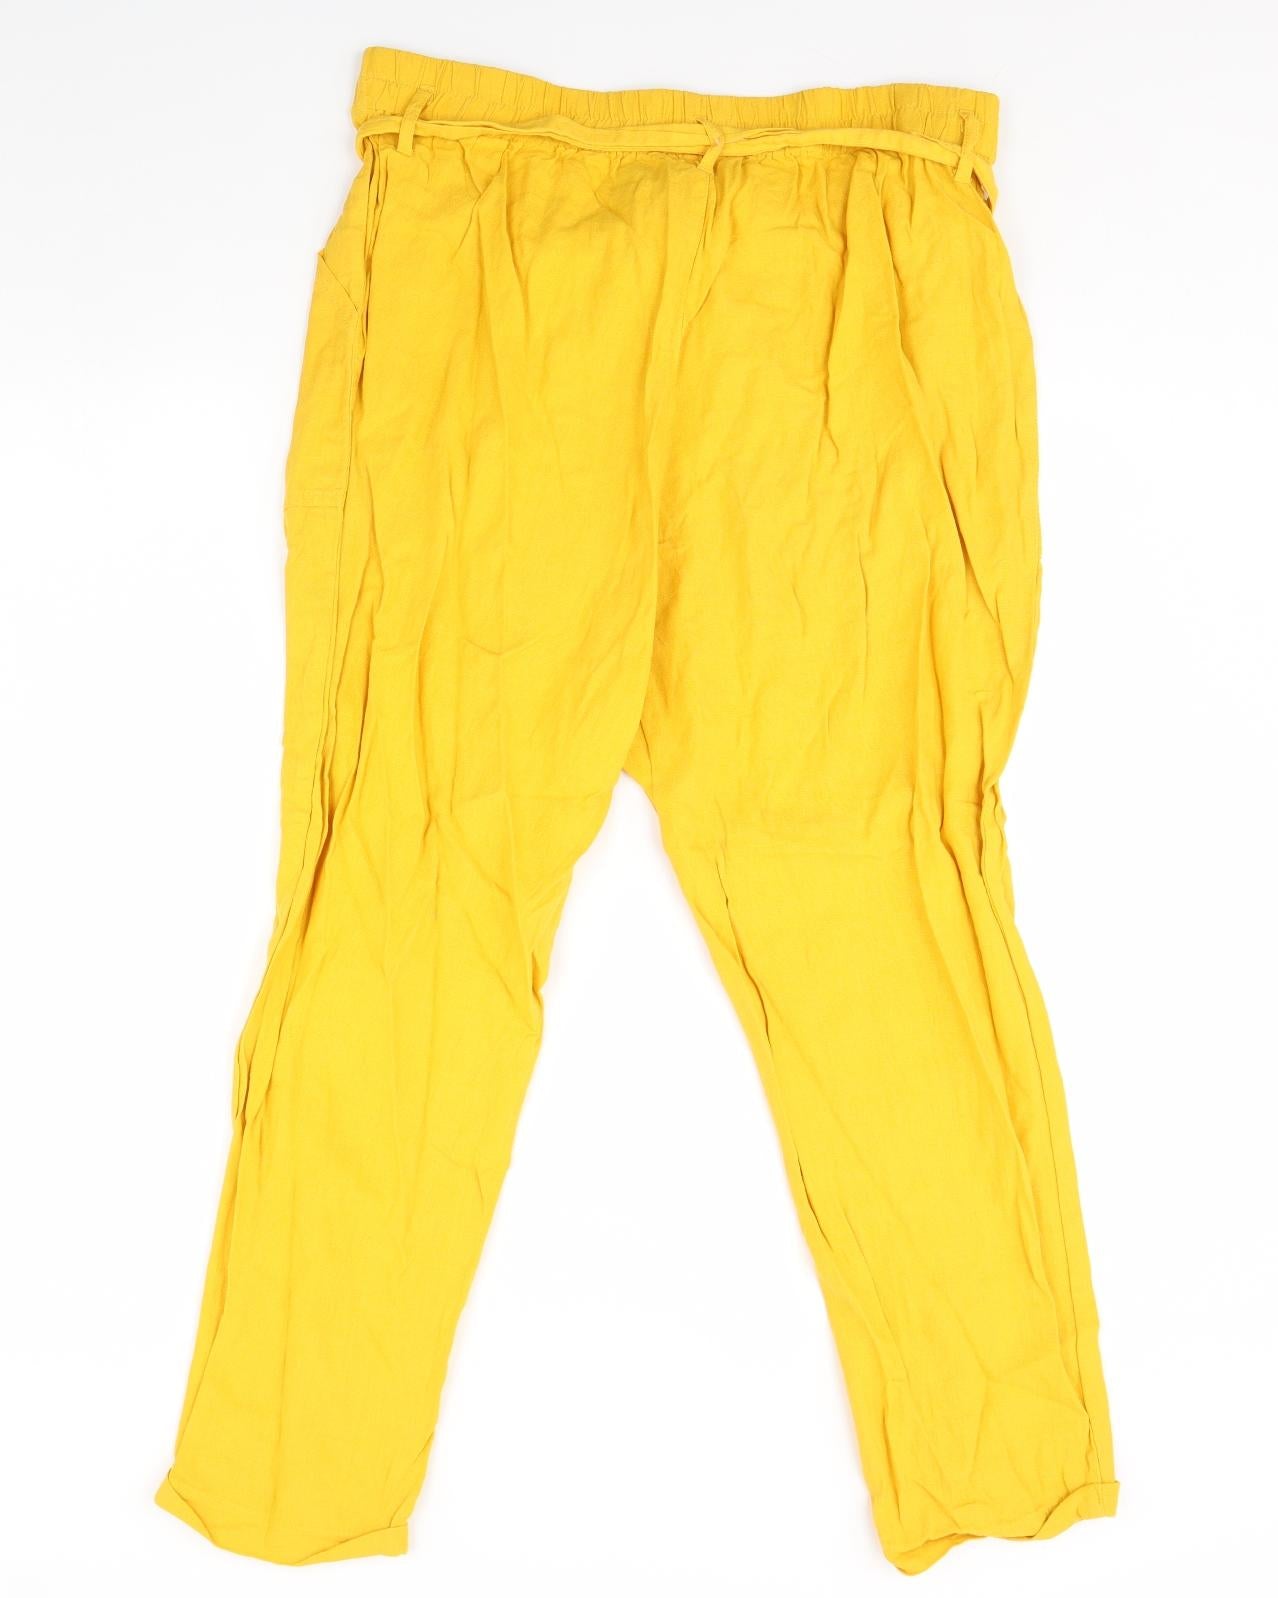 Yellow trousers from Primark  Vinted